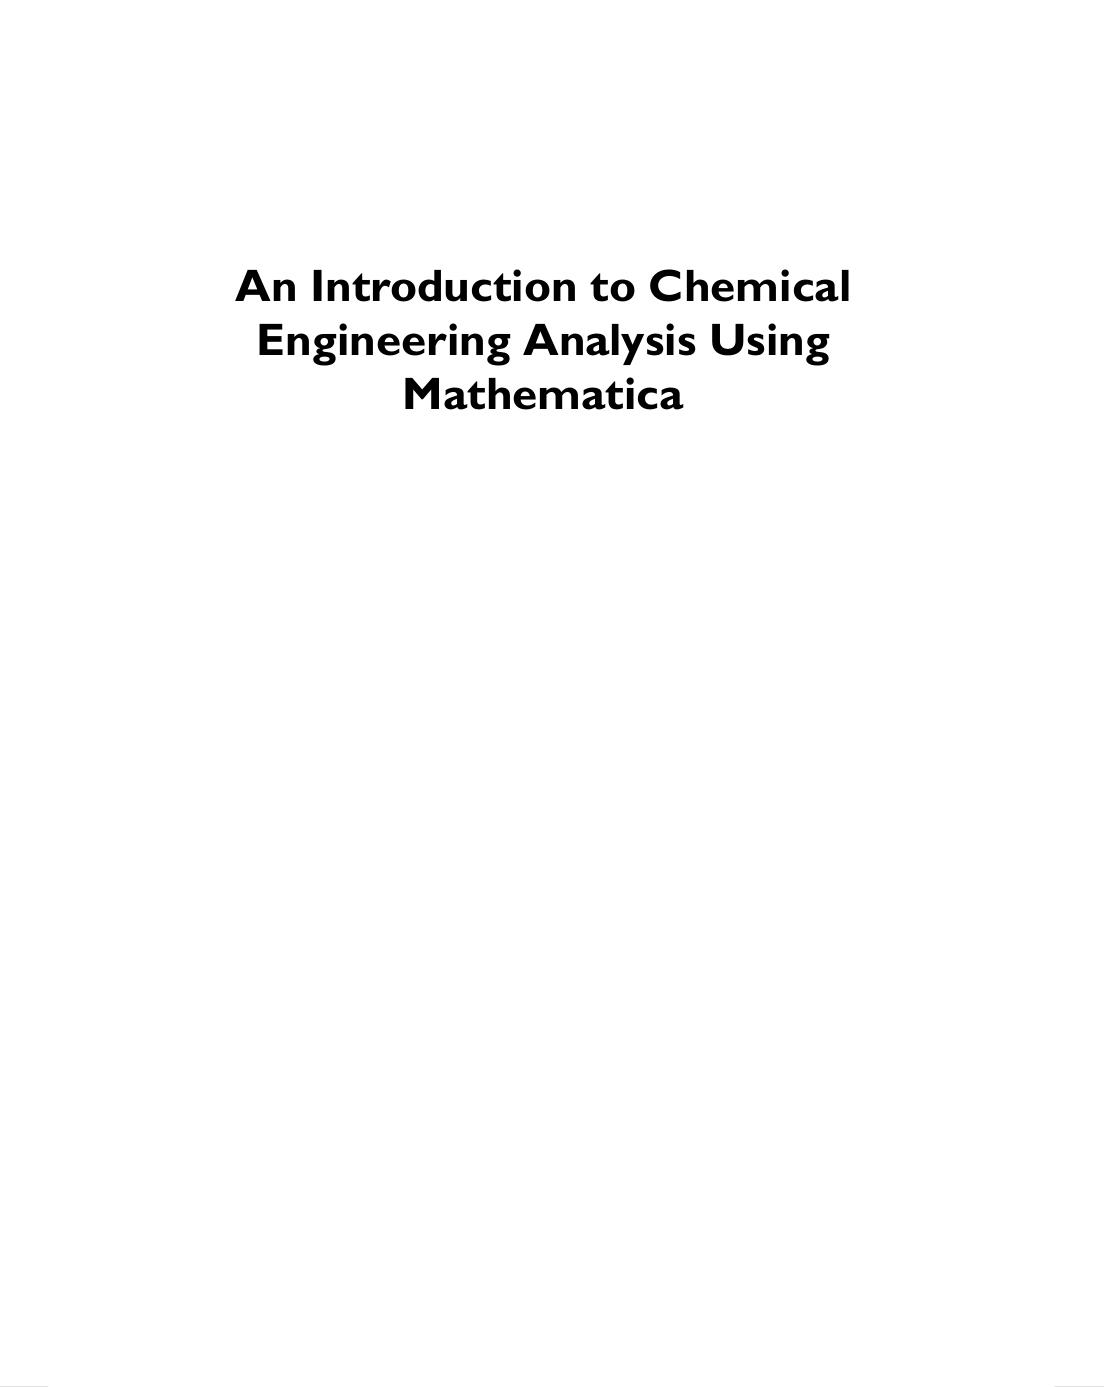 AN INTRODUCTION TO CHEMICAL ENGINEERING ANALYSIS USING MATHE                2002